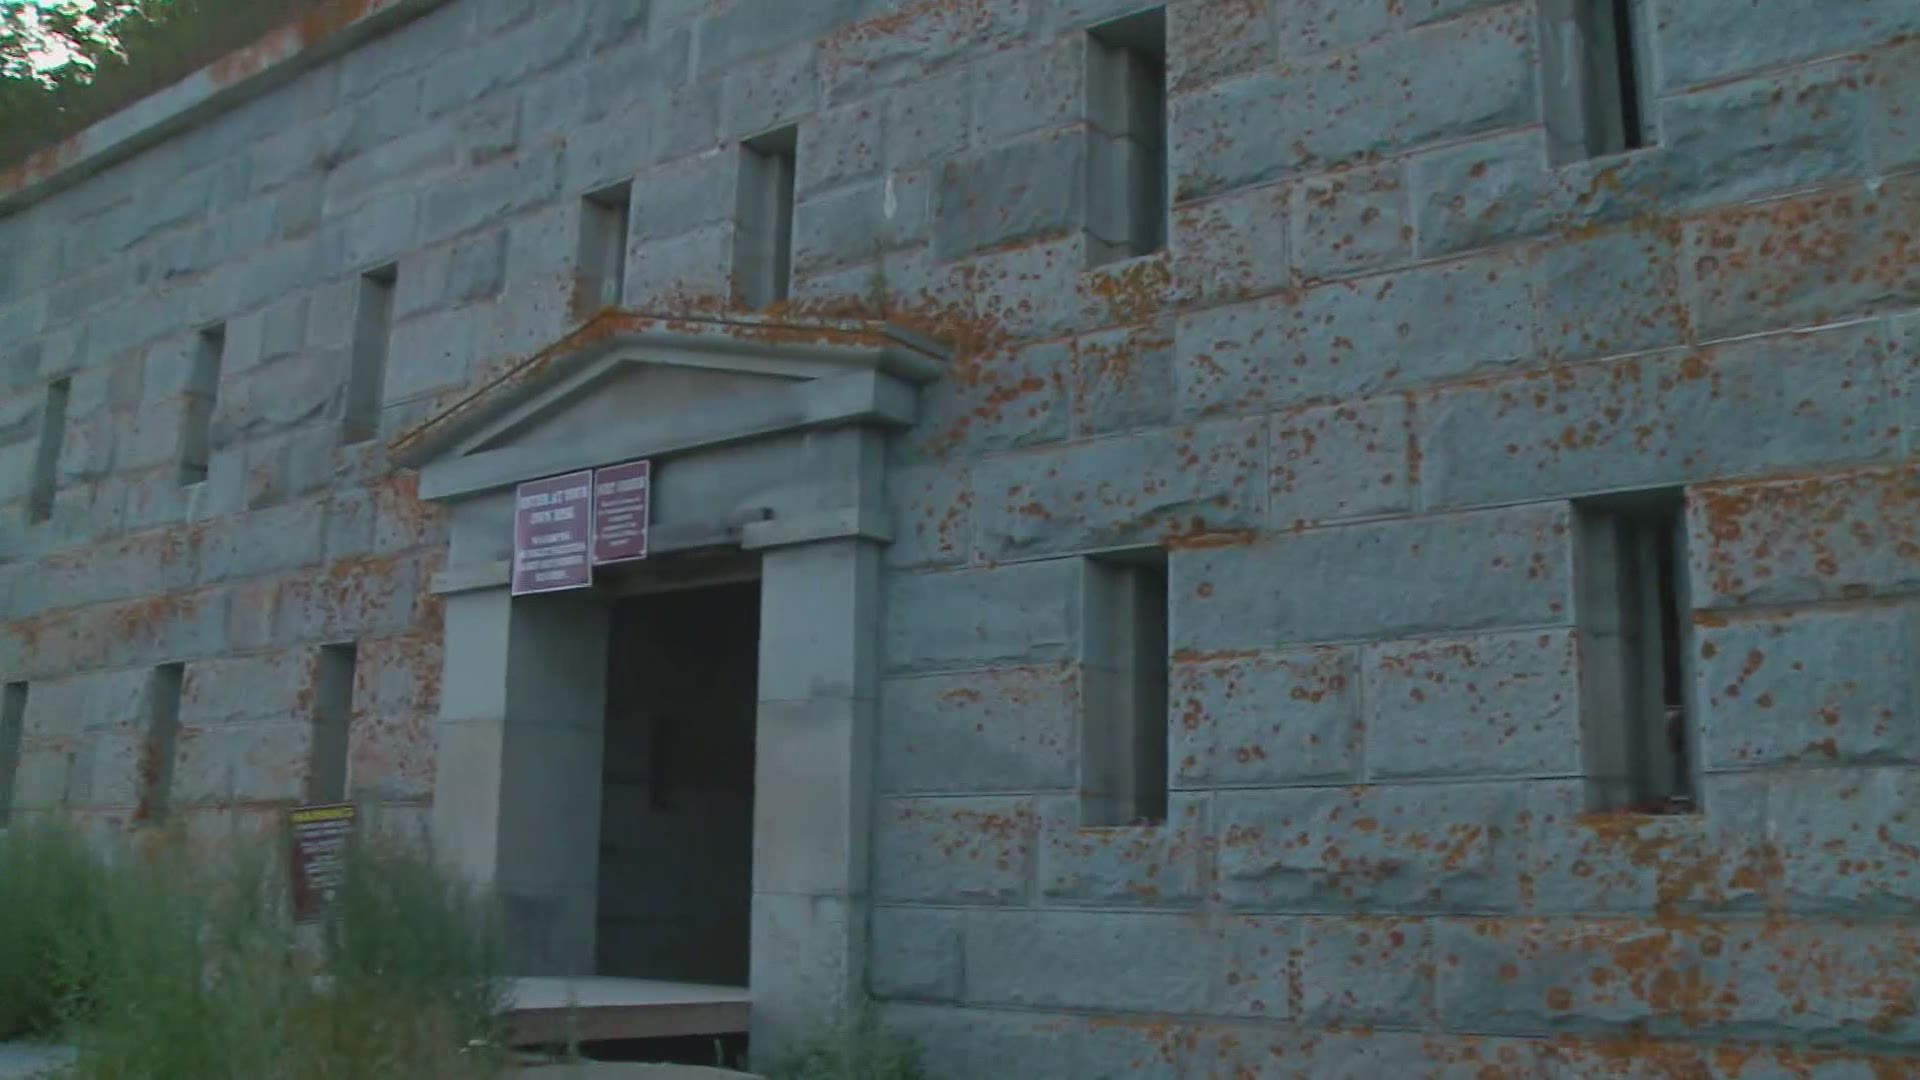 Fort Gorges is decaying and needs repair to stay open to the public